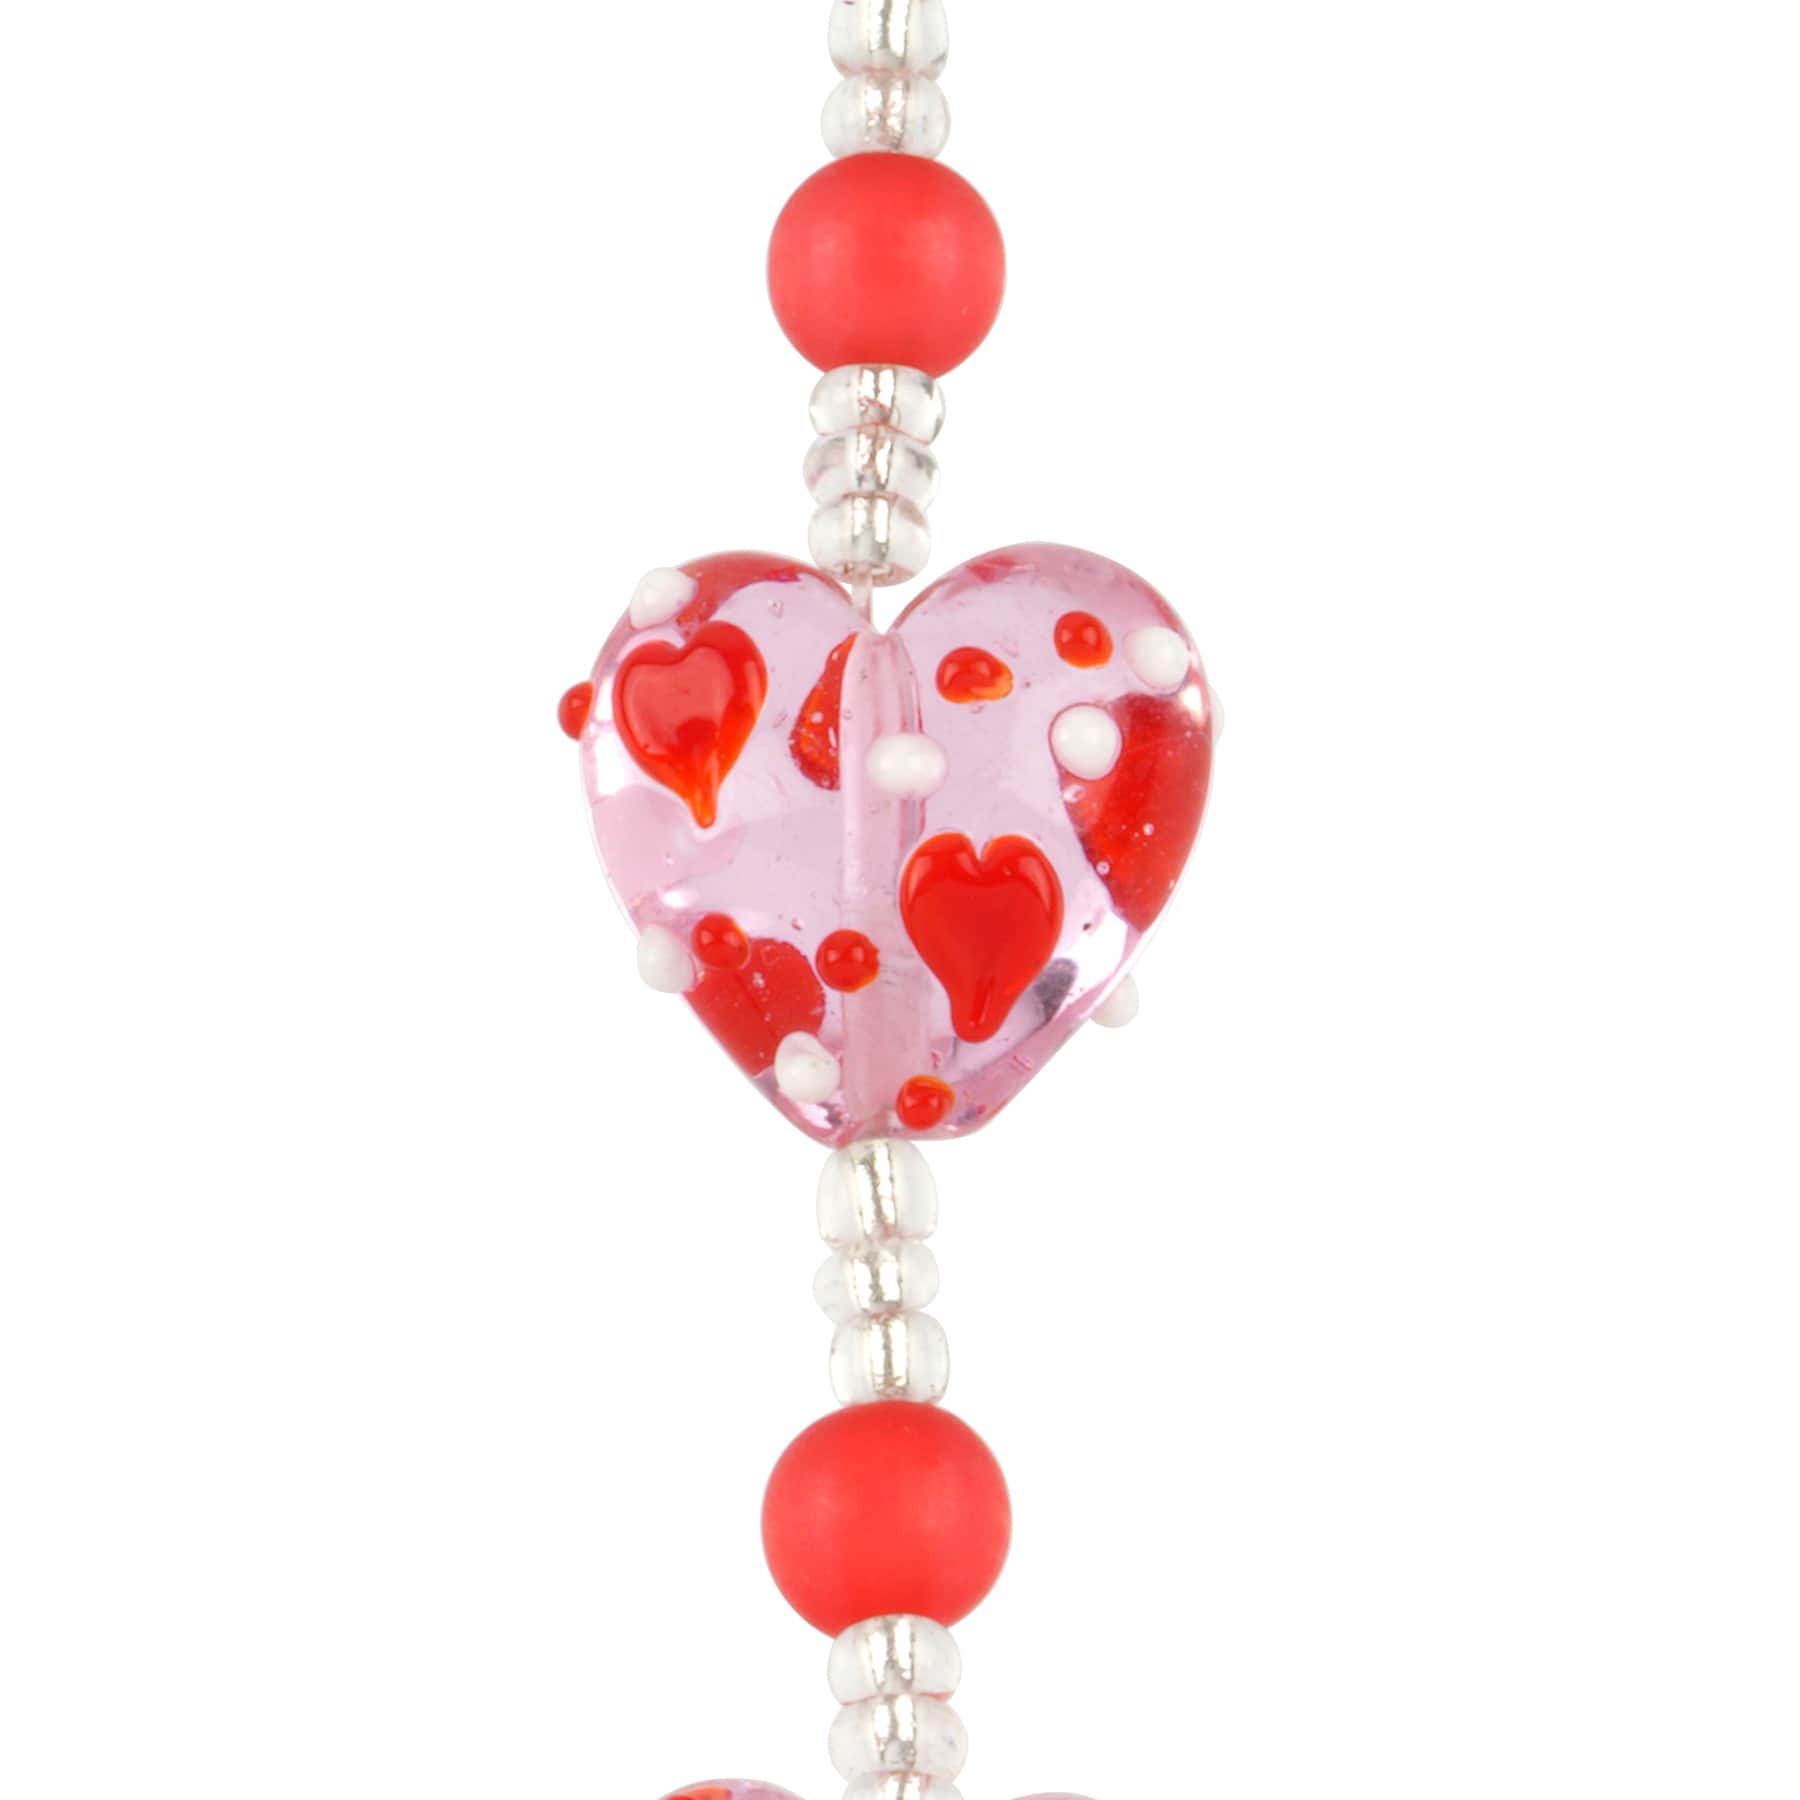 20mm x 19mm Lampwork Glass Heart Beads | Red and Pink Heart Beads | Love  Beads | Valentine Beads | Pack of Two (2) Beads